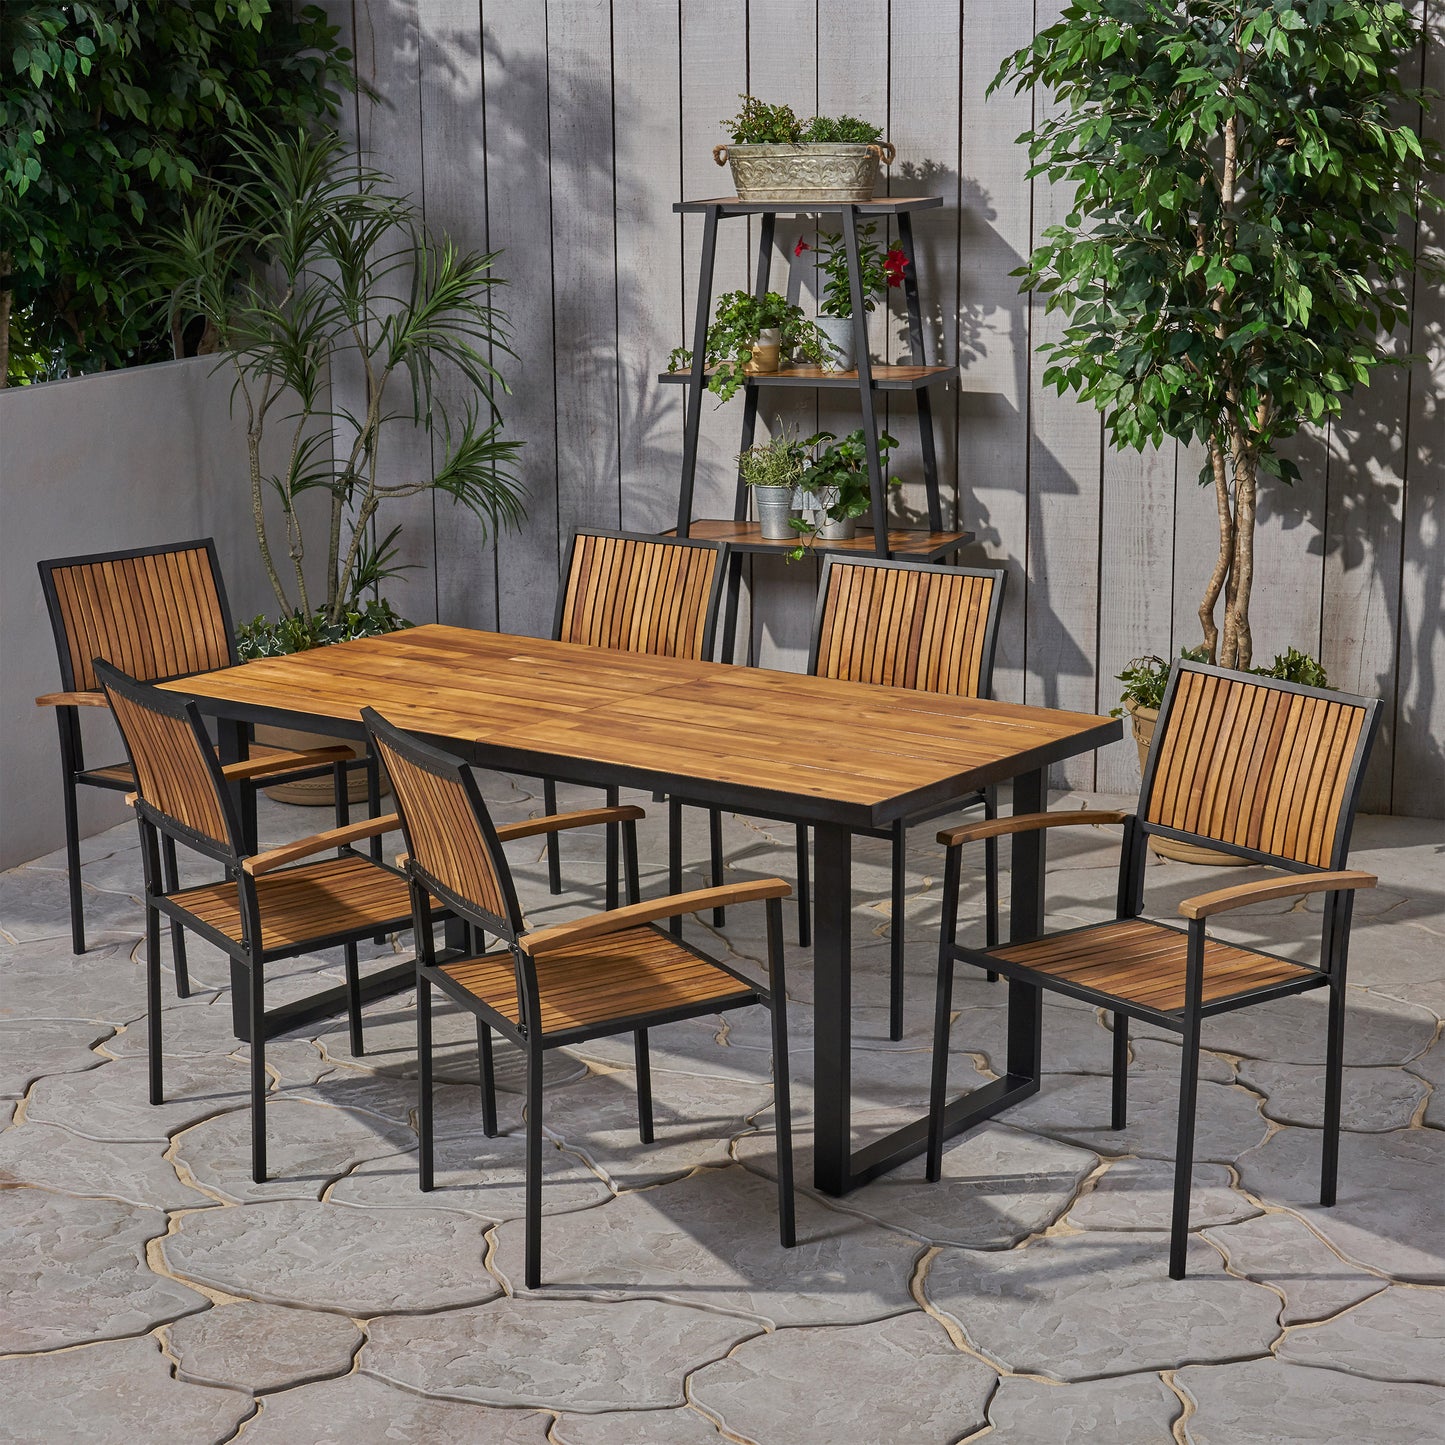 Stoic Outdoor 6 Seater Acacia Wood Dining Set with an Iron Frame